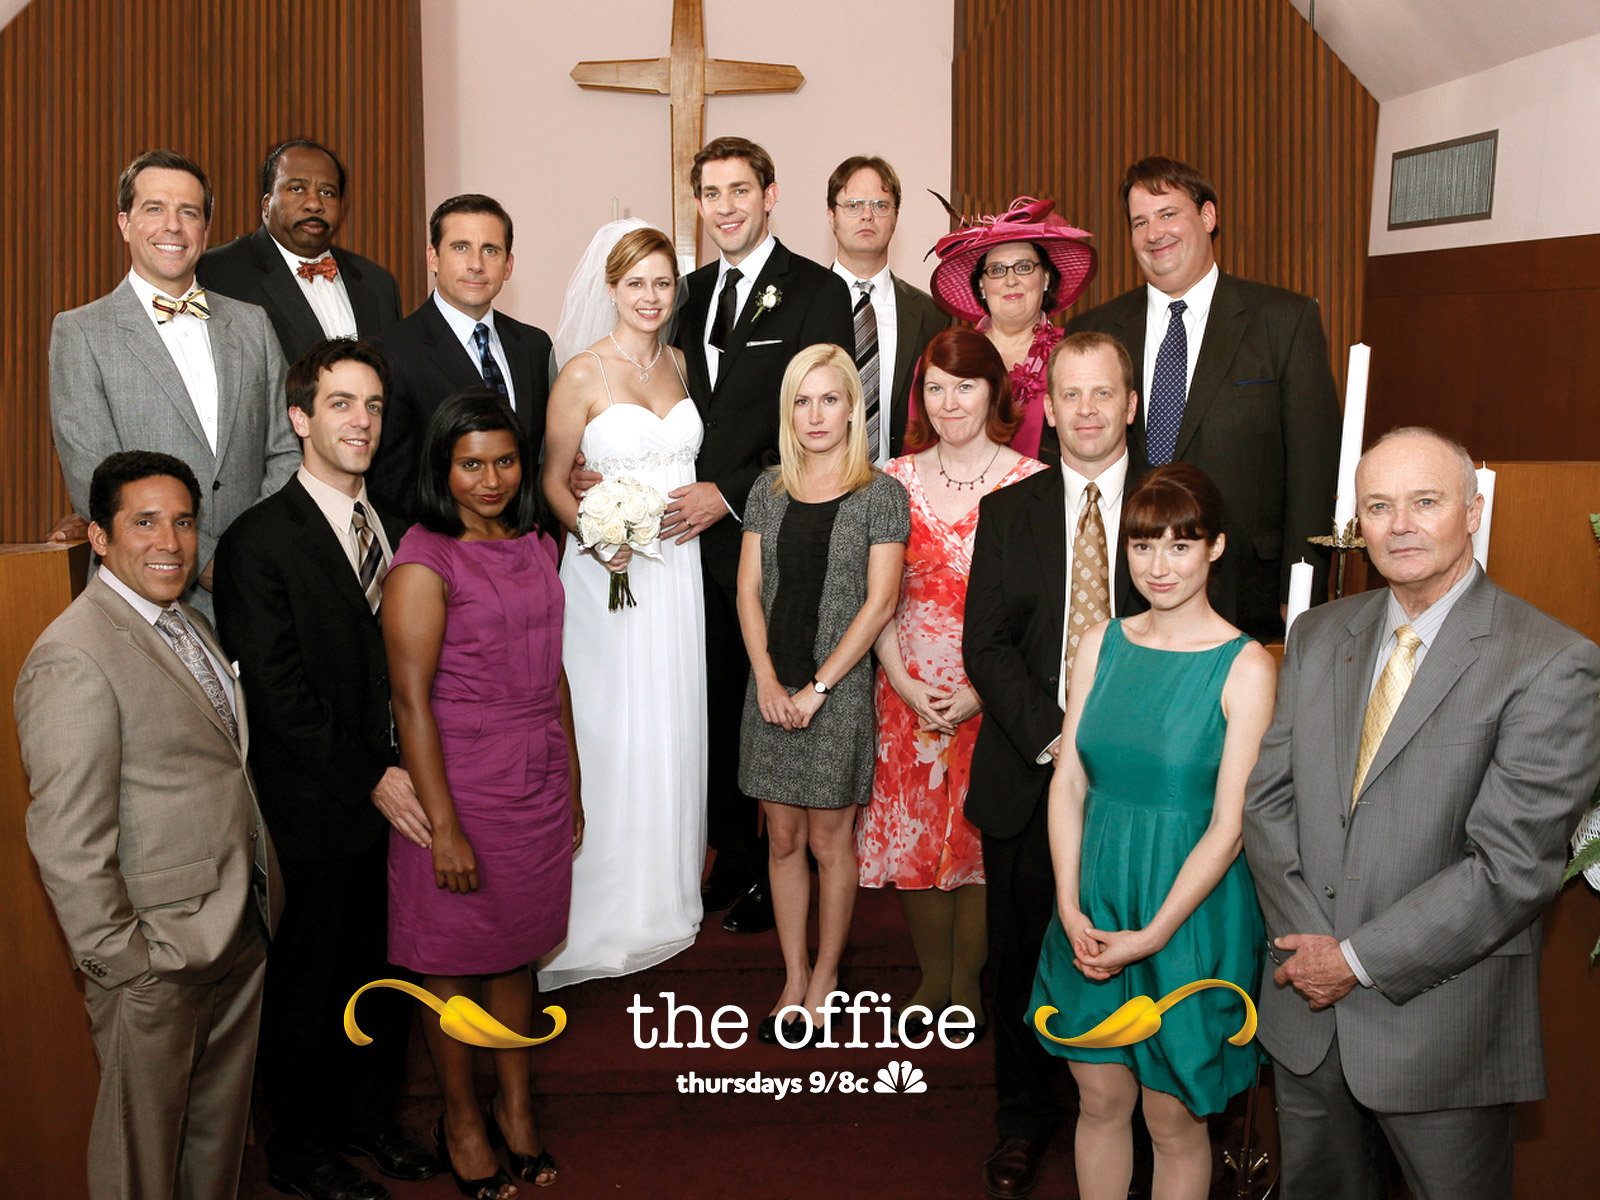 The Office Wallpaper  Office wallpaper, The office show, The office